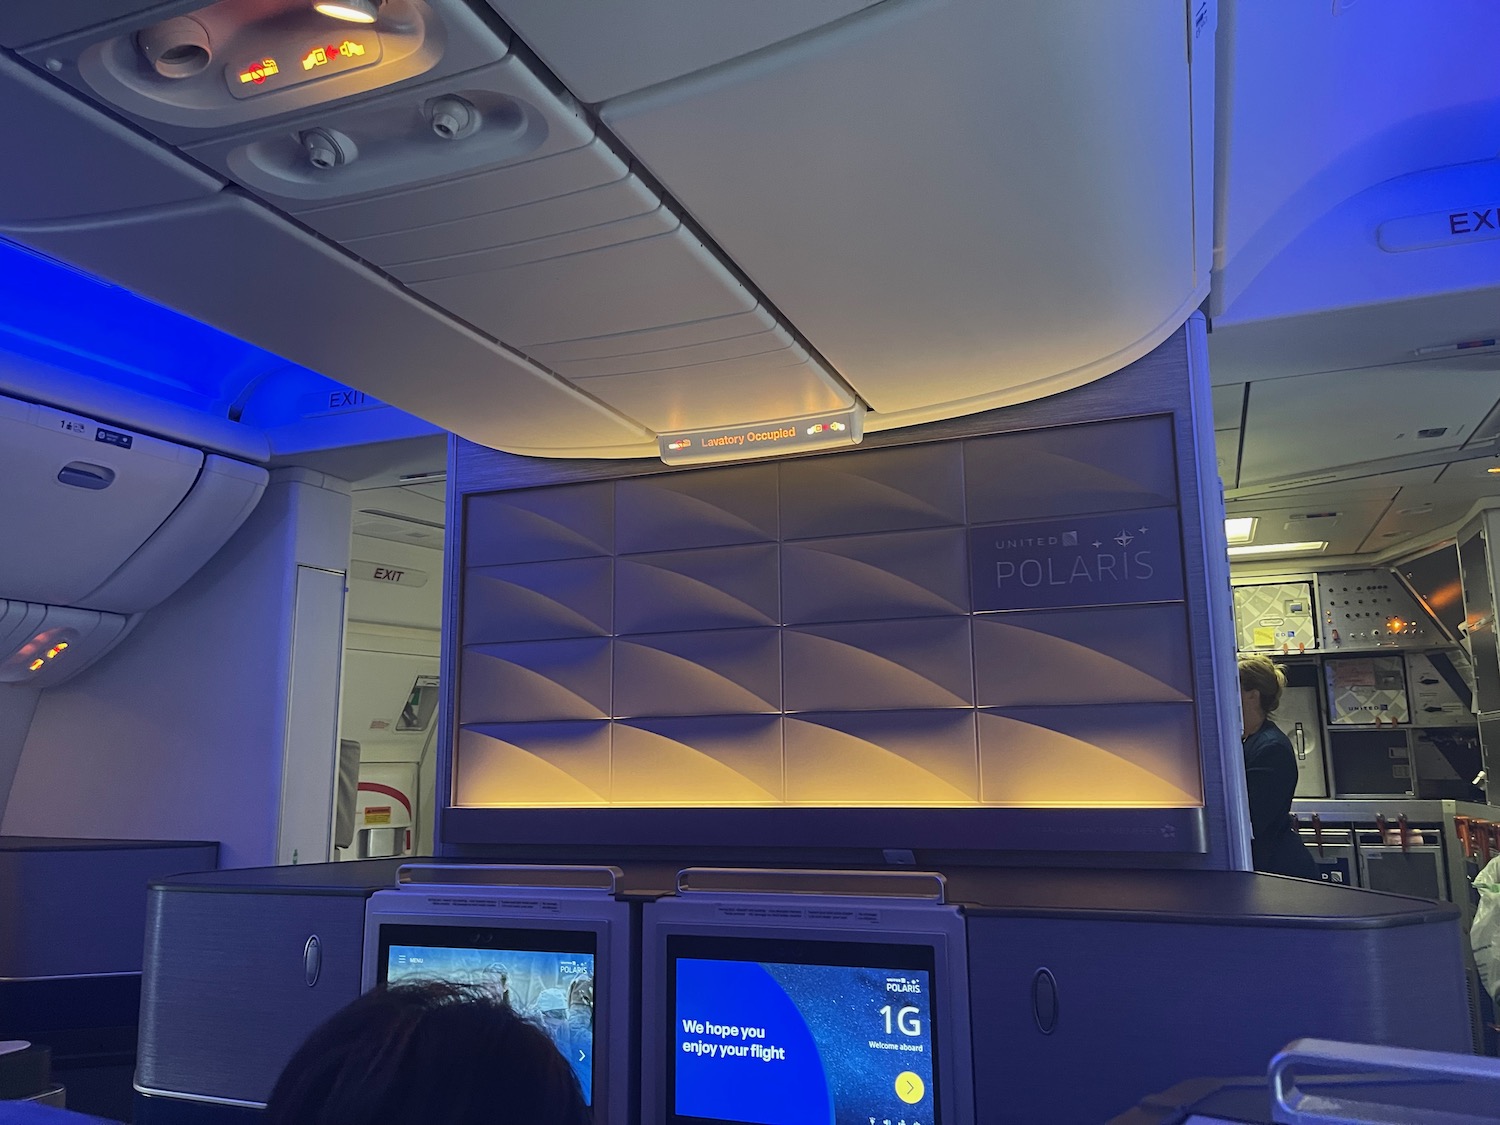 a tvs and screens in an airplane